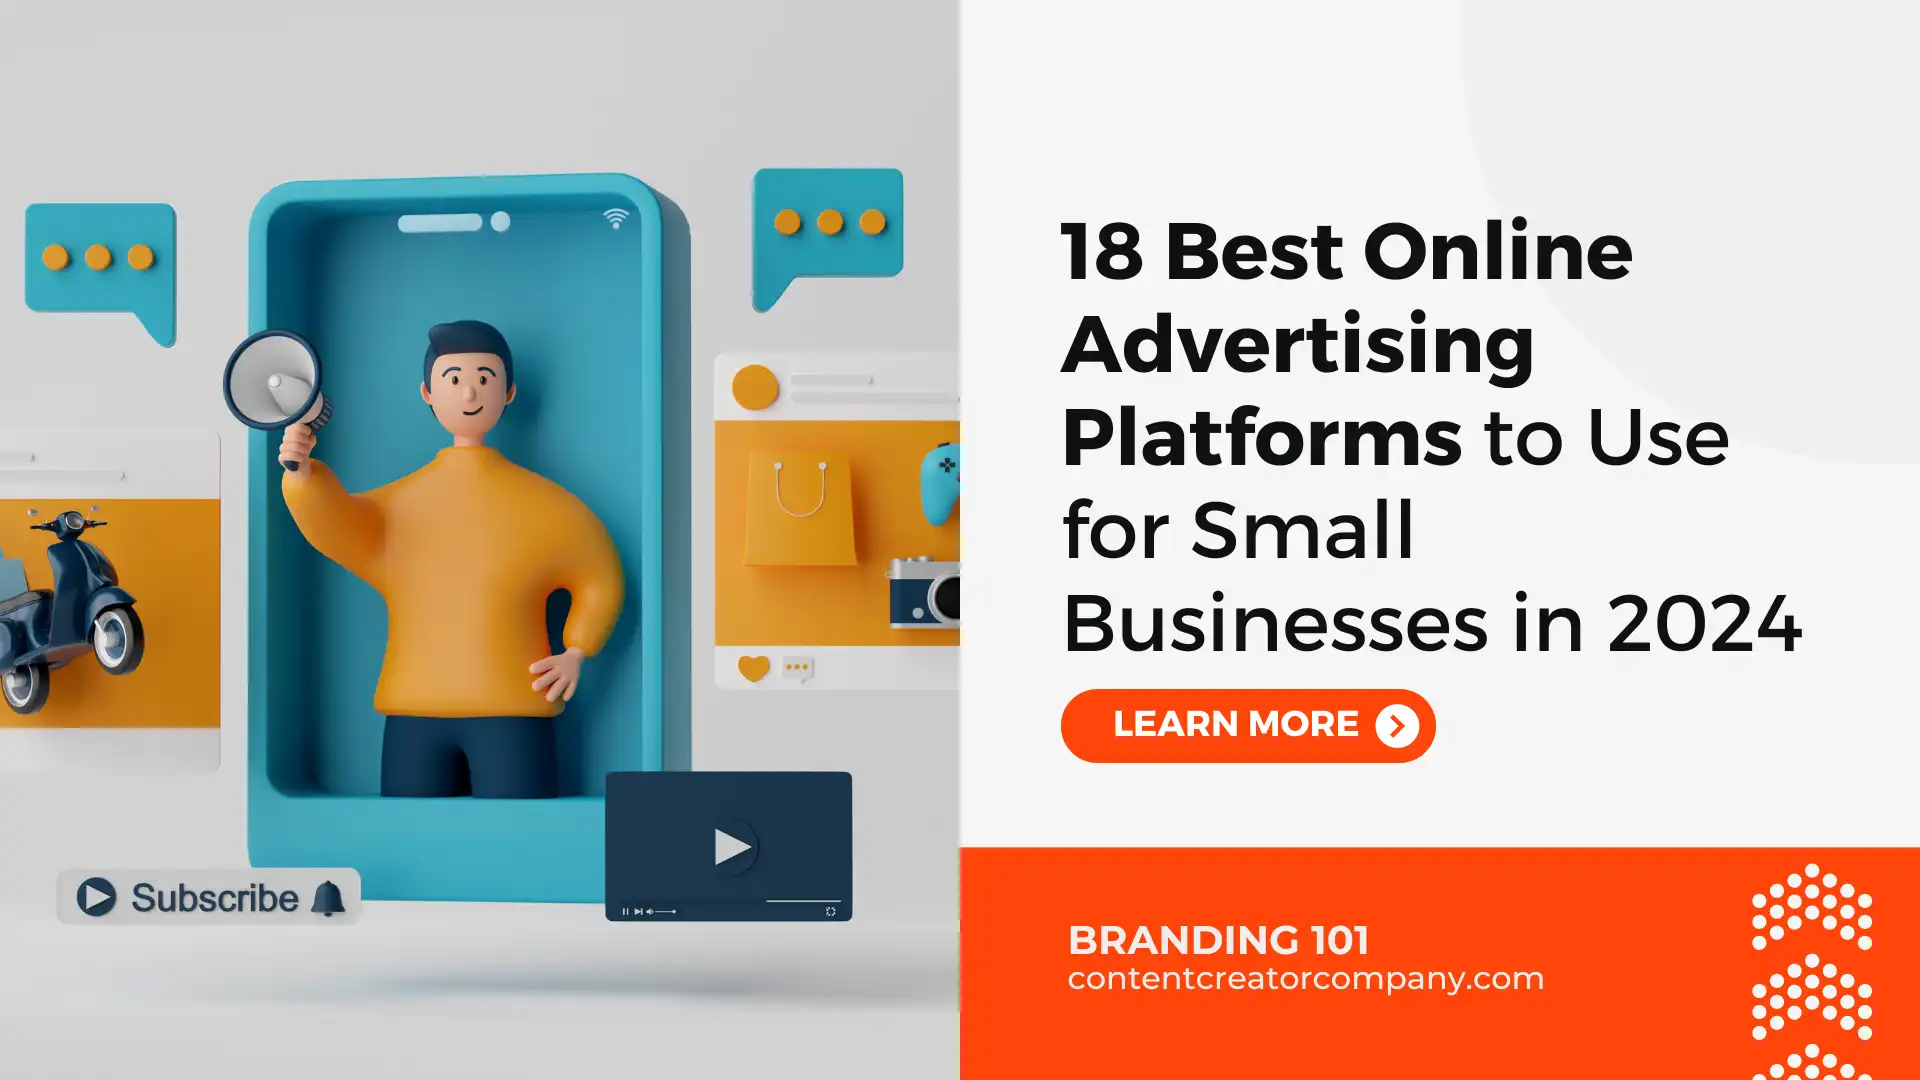 18 Best Online Advertising Platforms to Use for Small Businesses in 2024